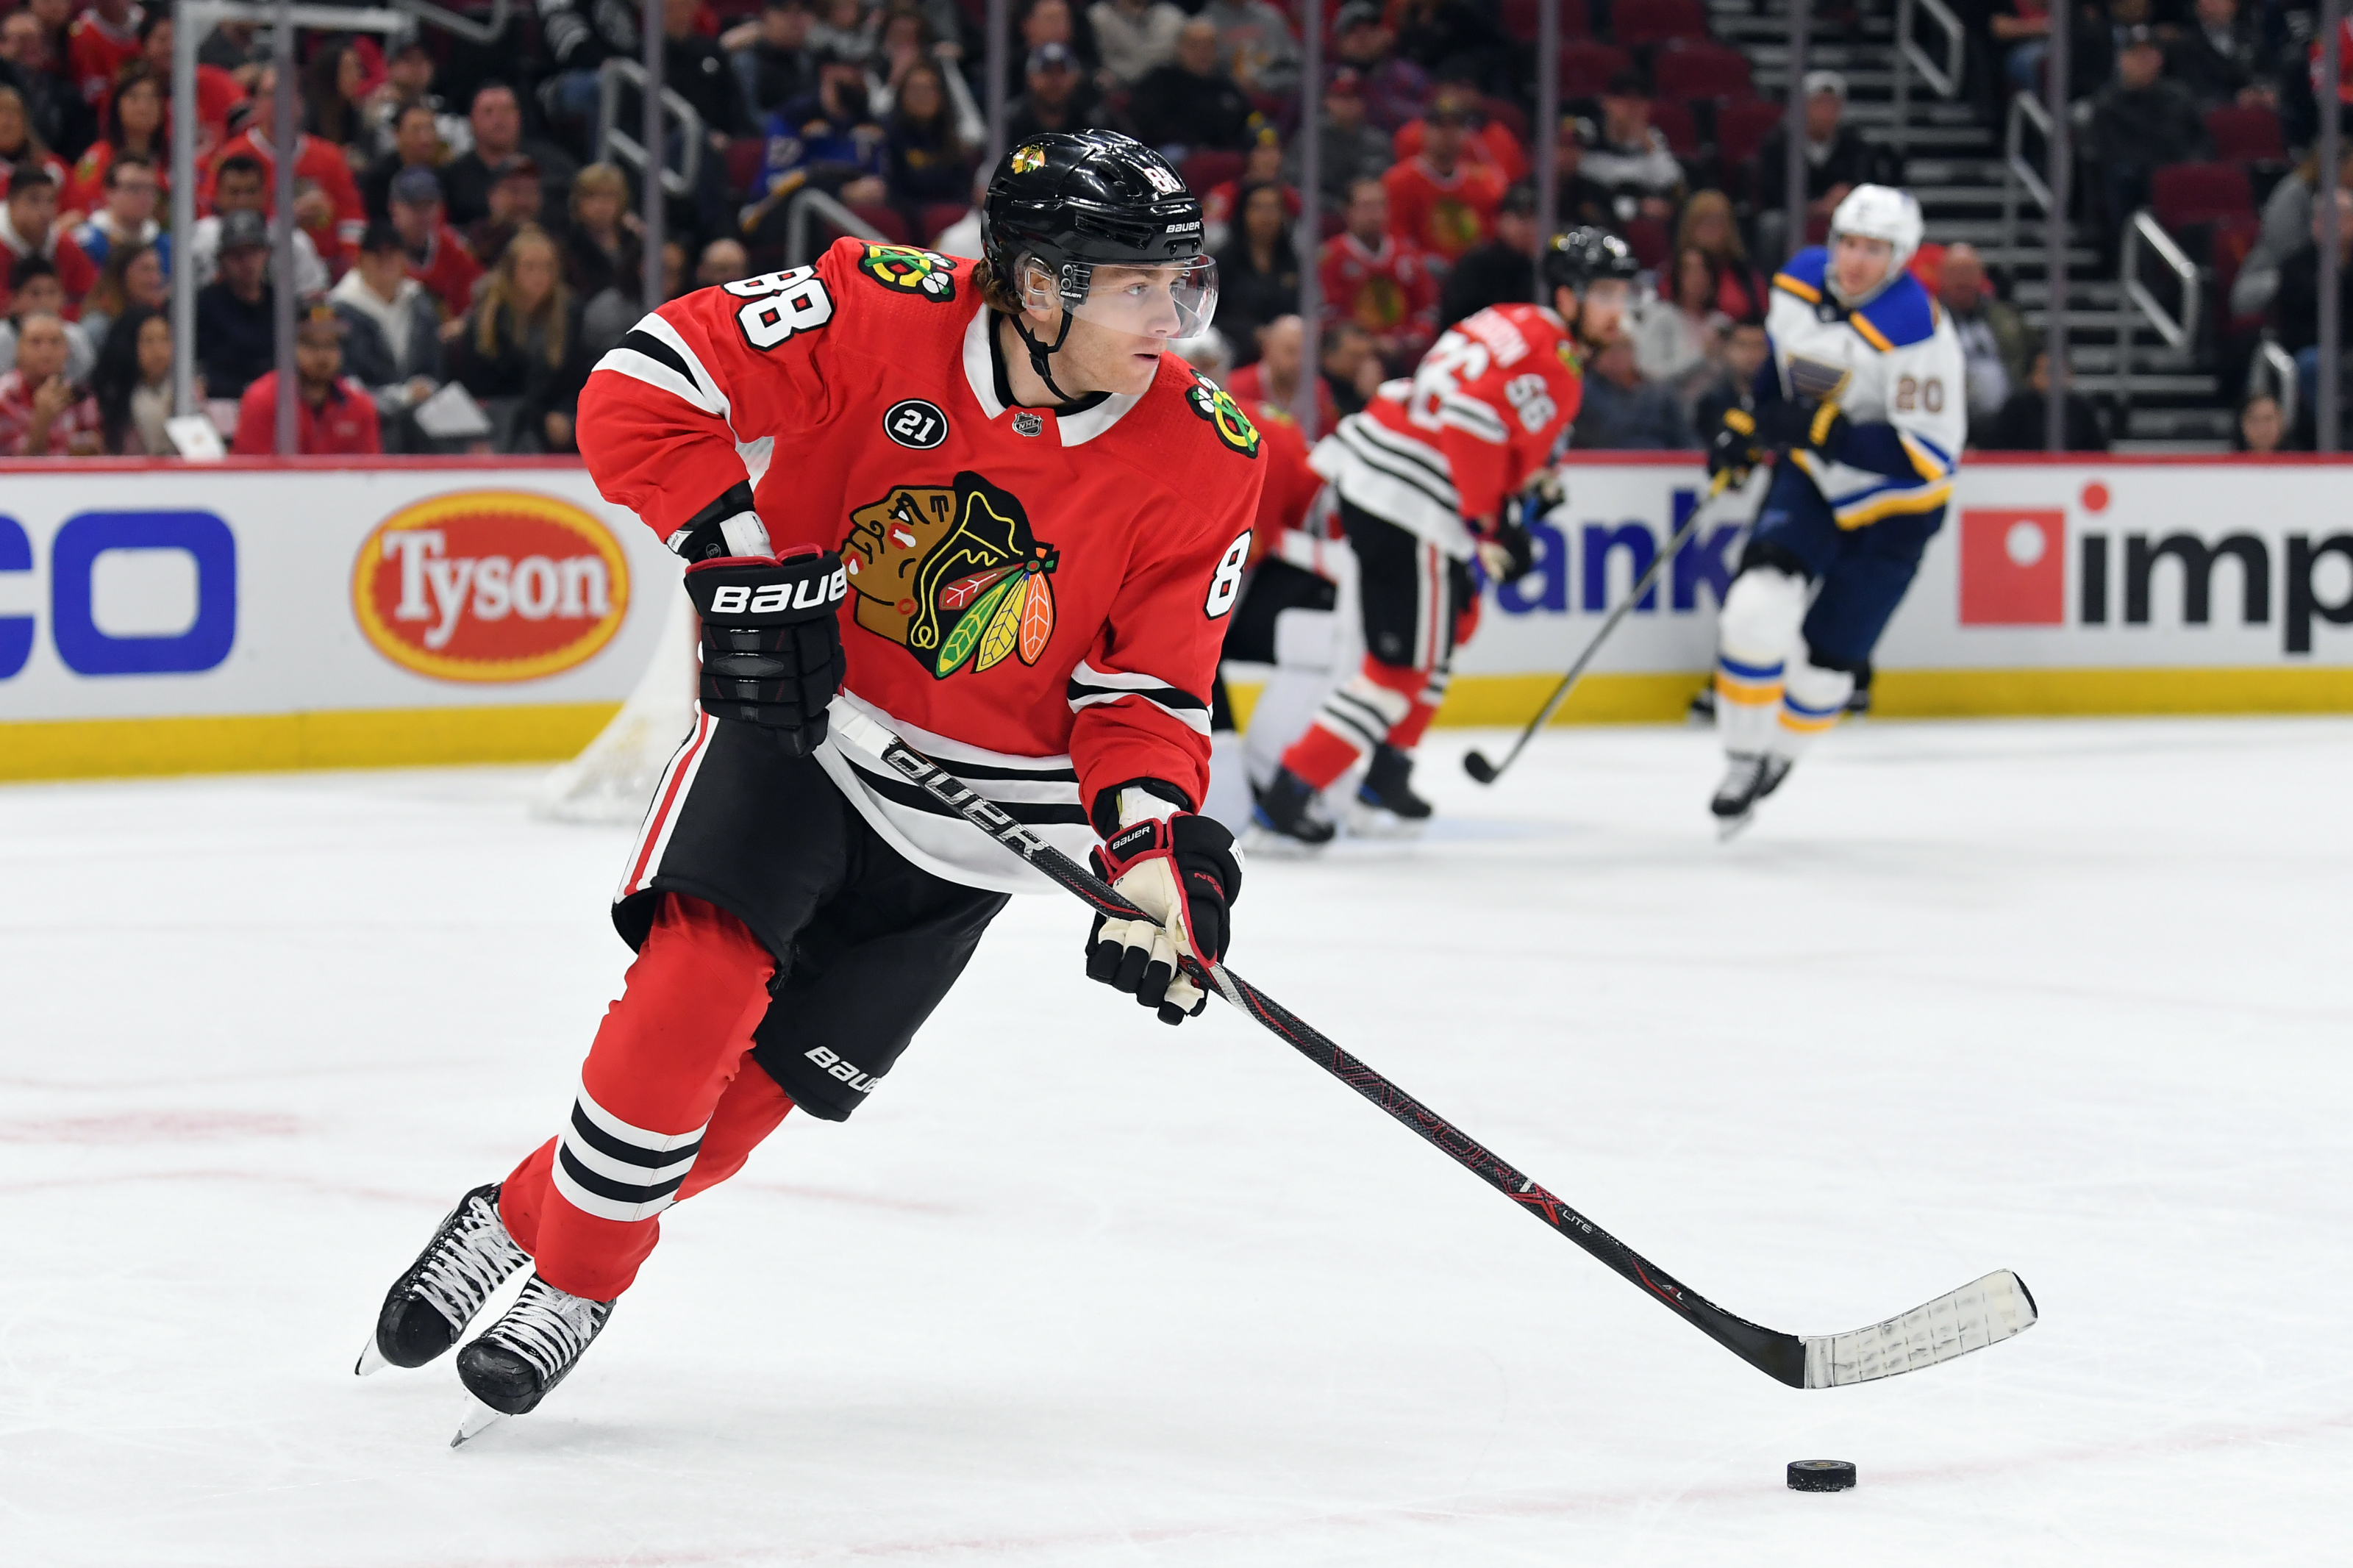 Patrick Kane inspires young kid with haircut - Chicago Sun-Times